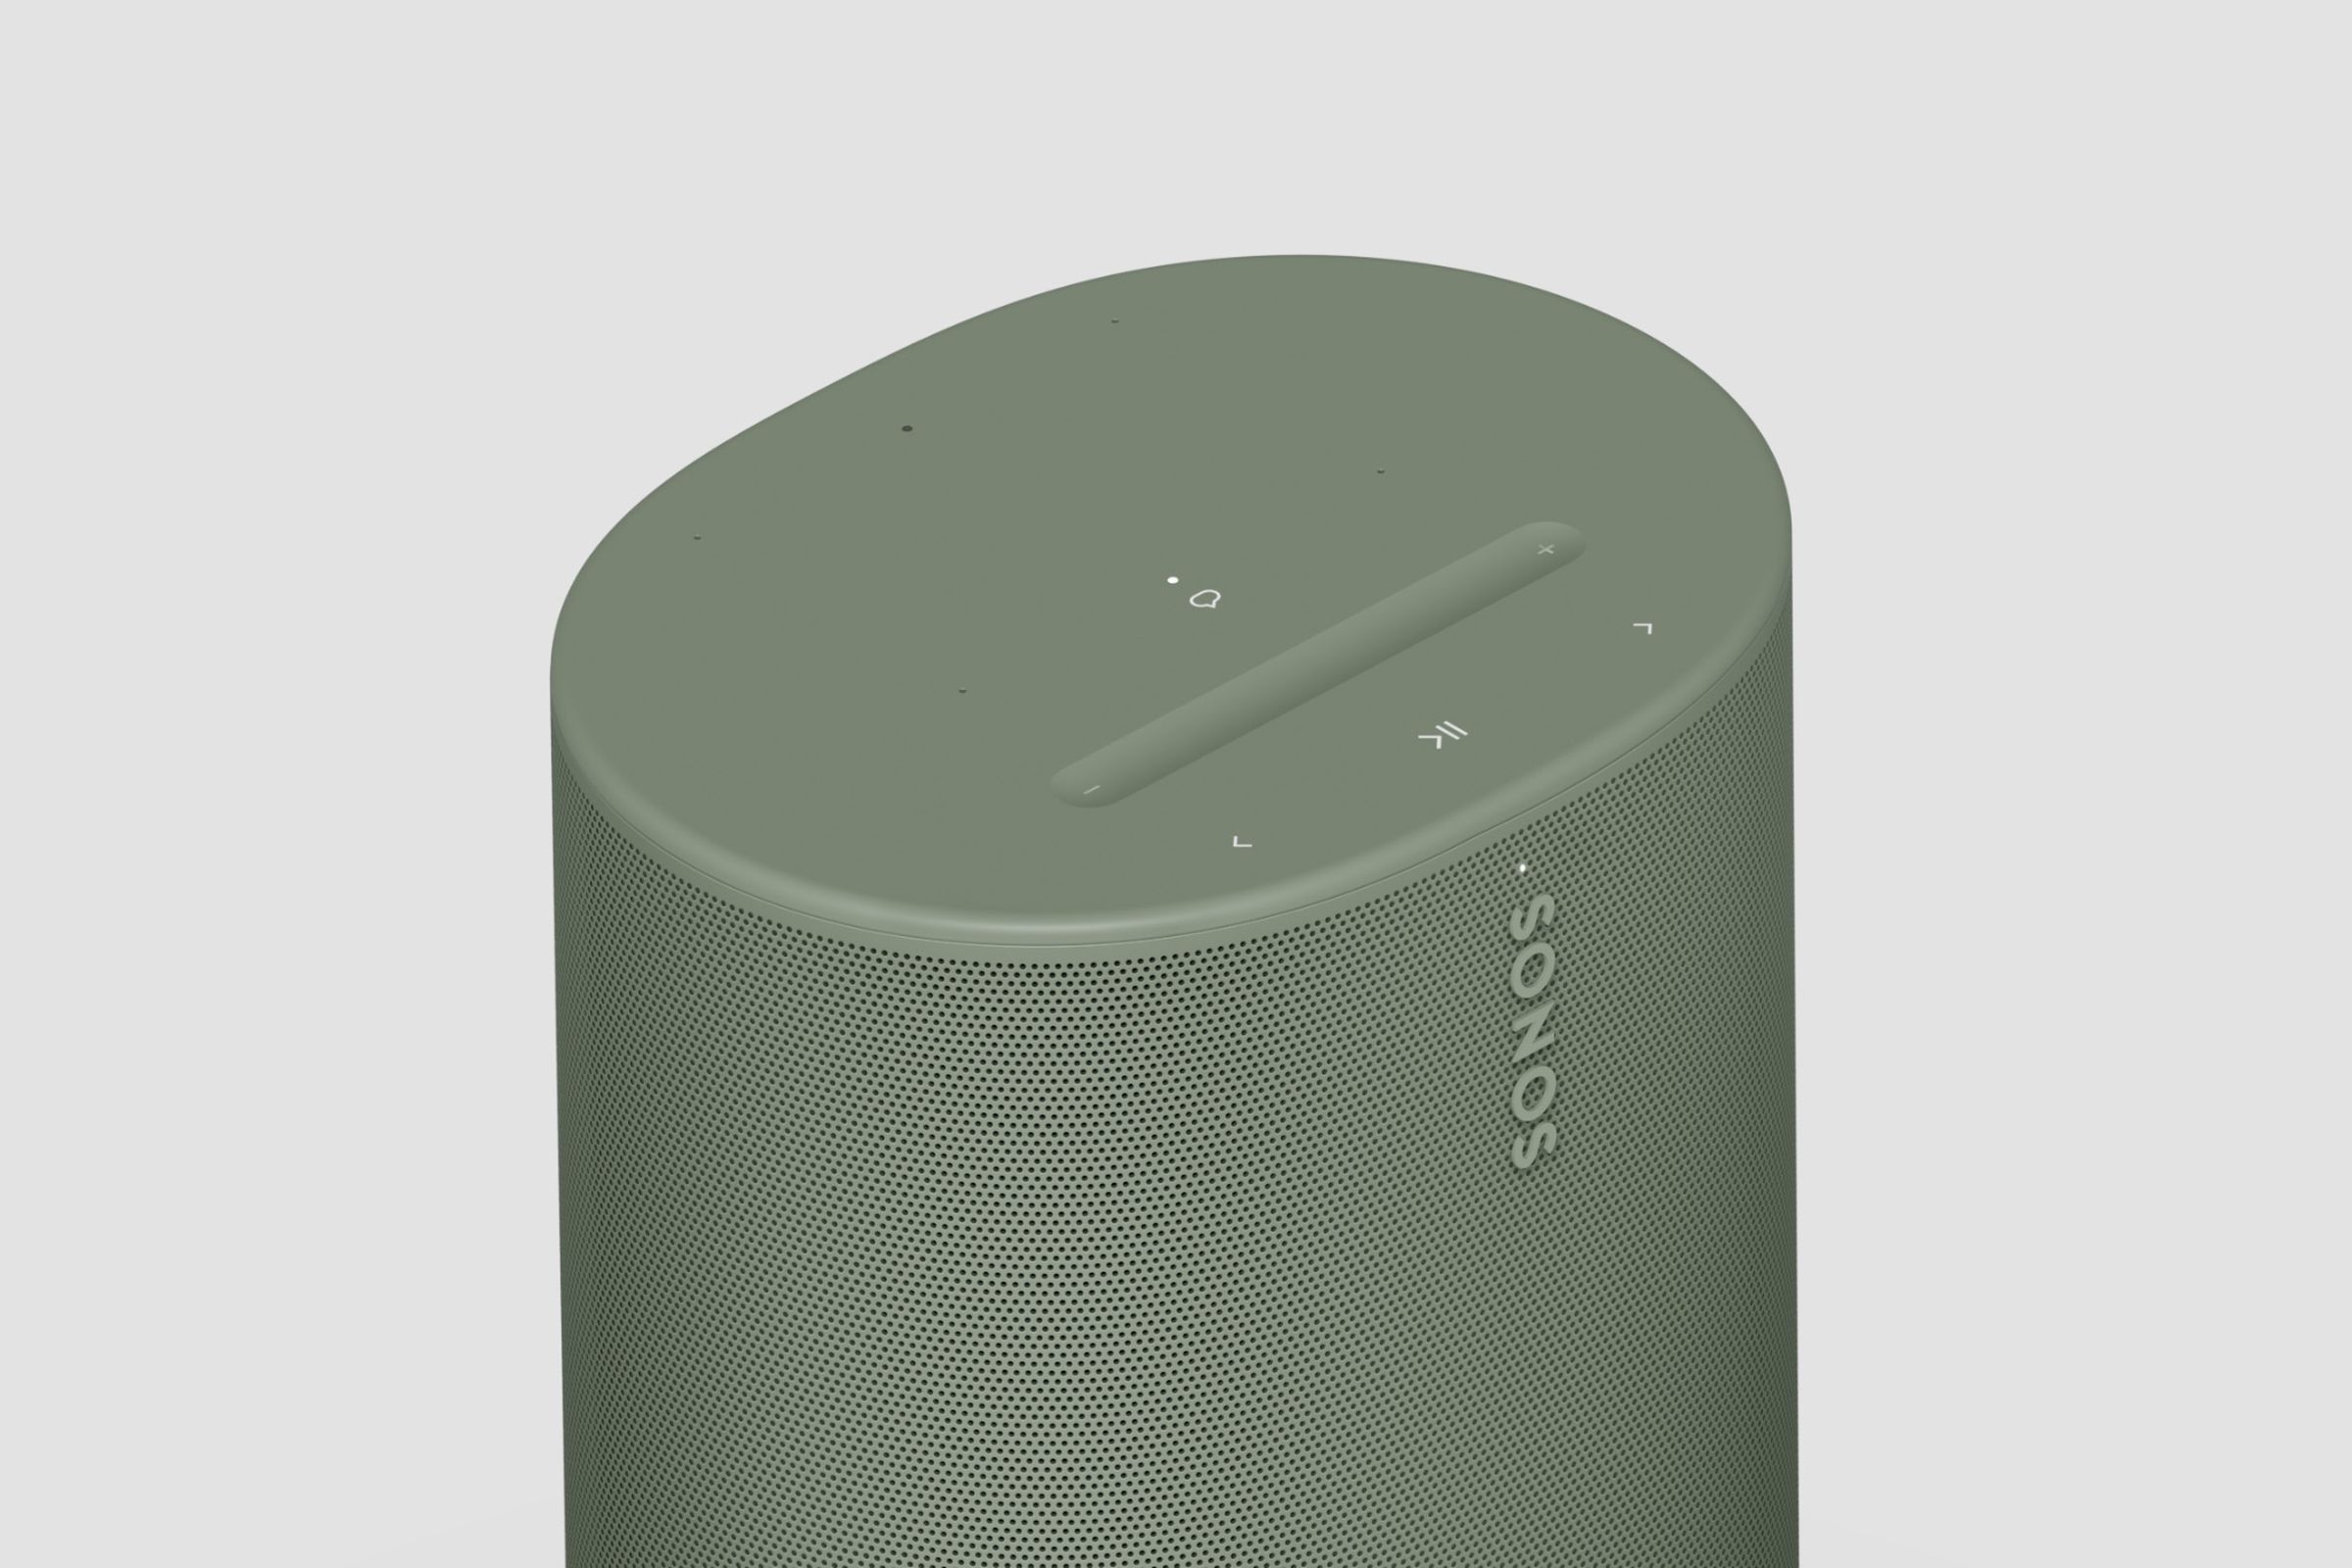 A marketing image showing the controls of Sonos’ Move 2 speaker.